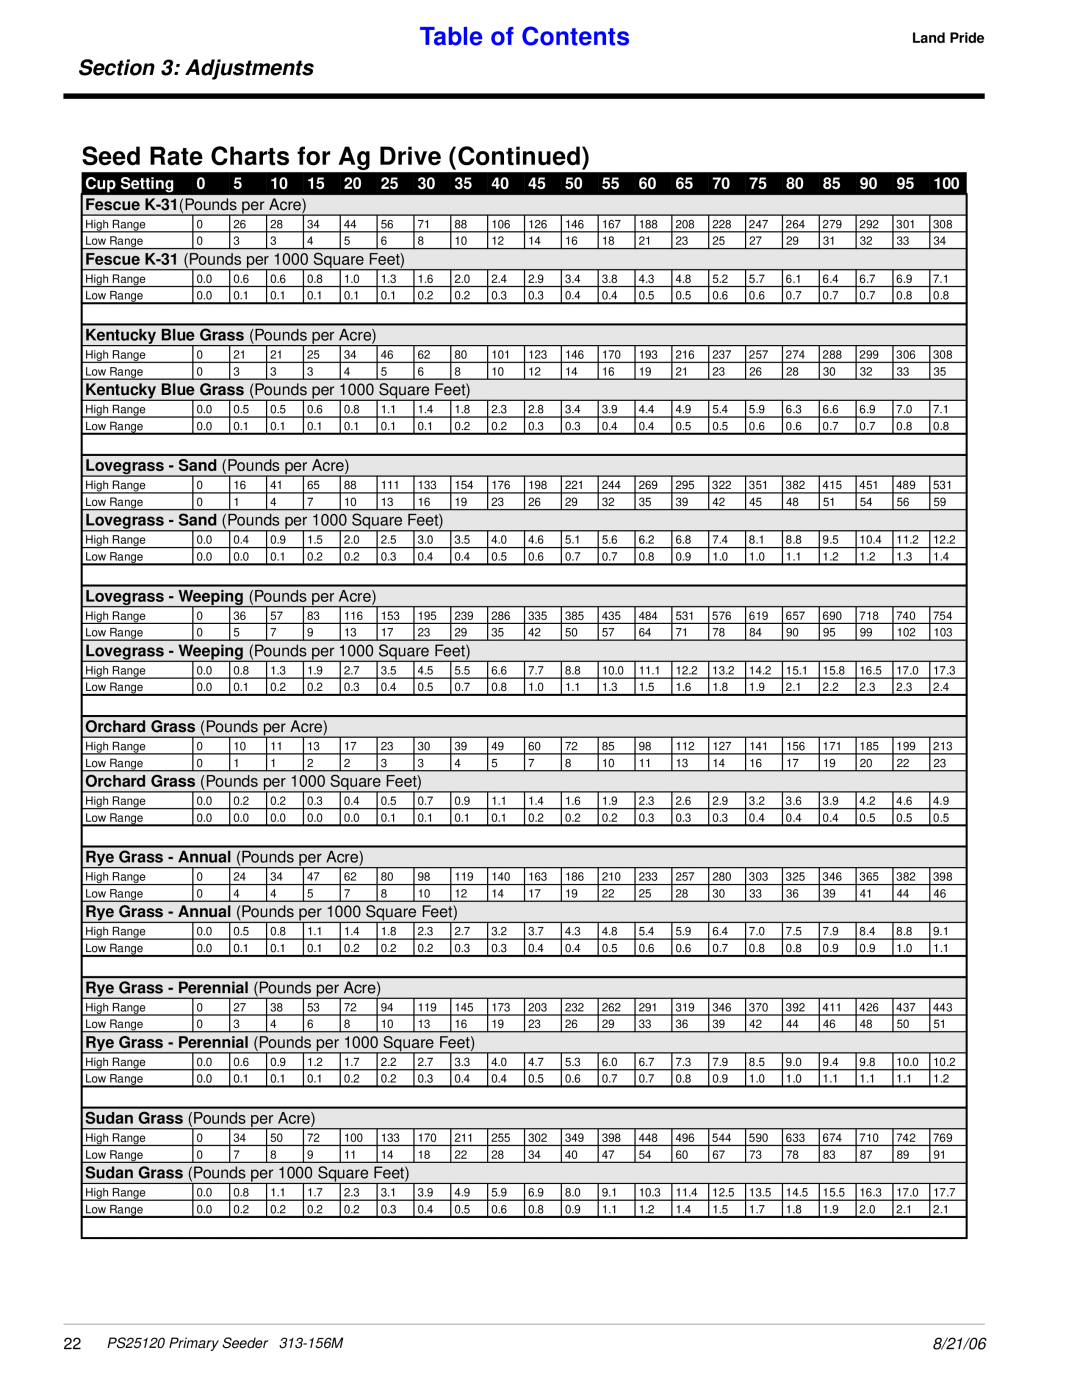 Land Pride PS25120 manual Seed Rate Charts for Ag Drive Continued, Table of Contents, Adjustments, 8/21/06 